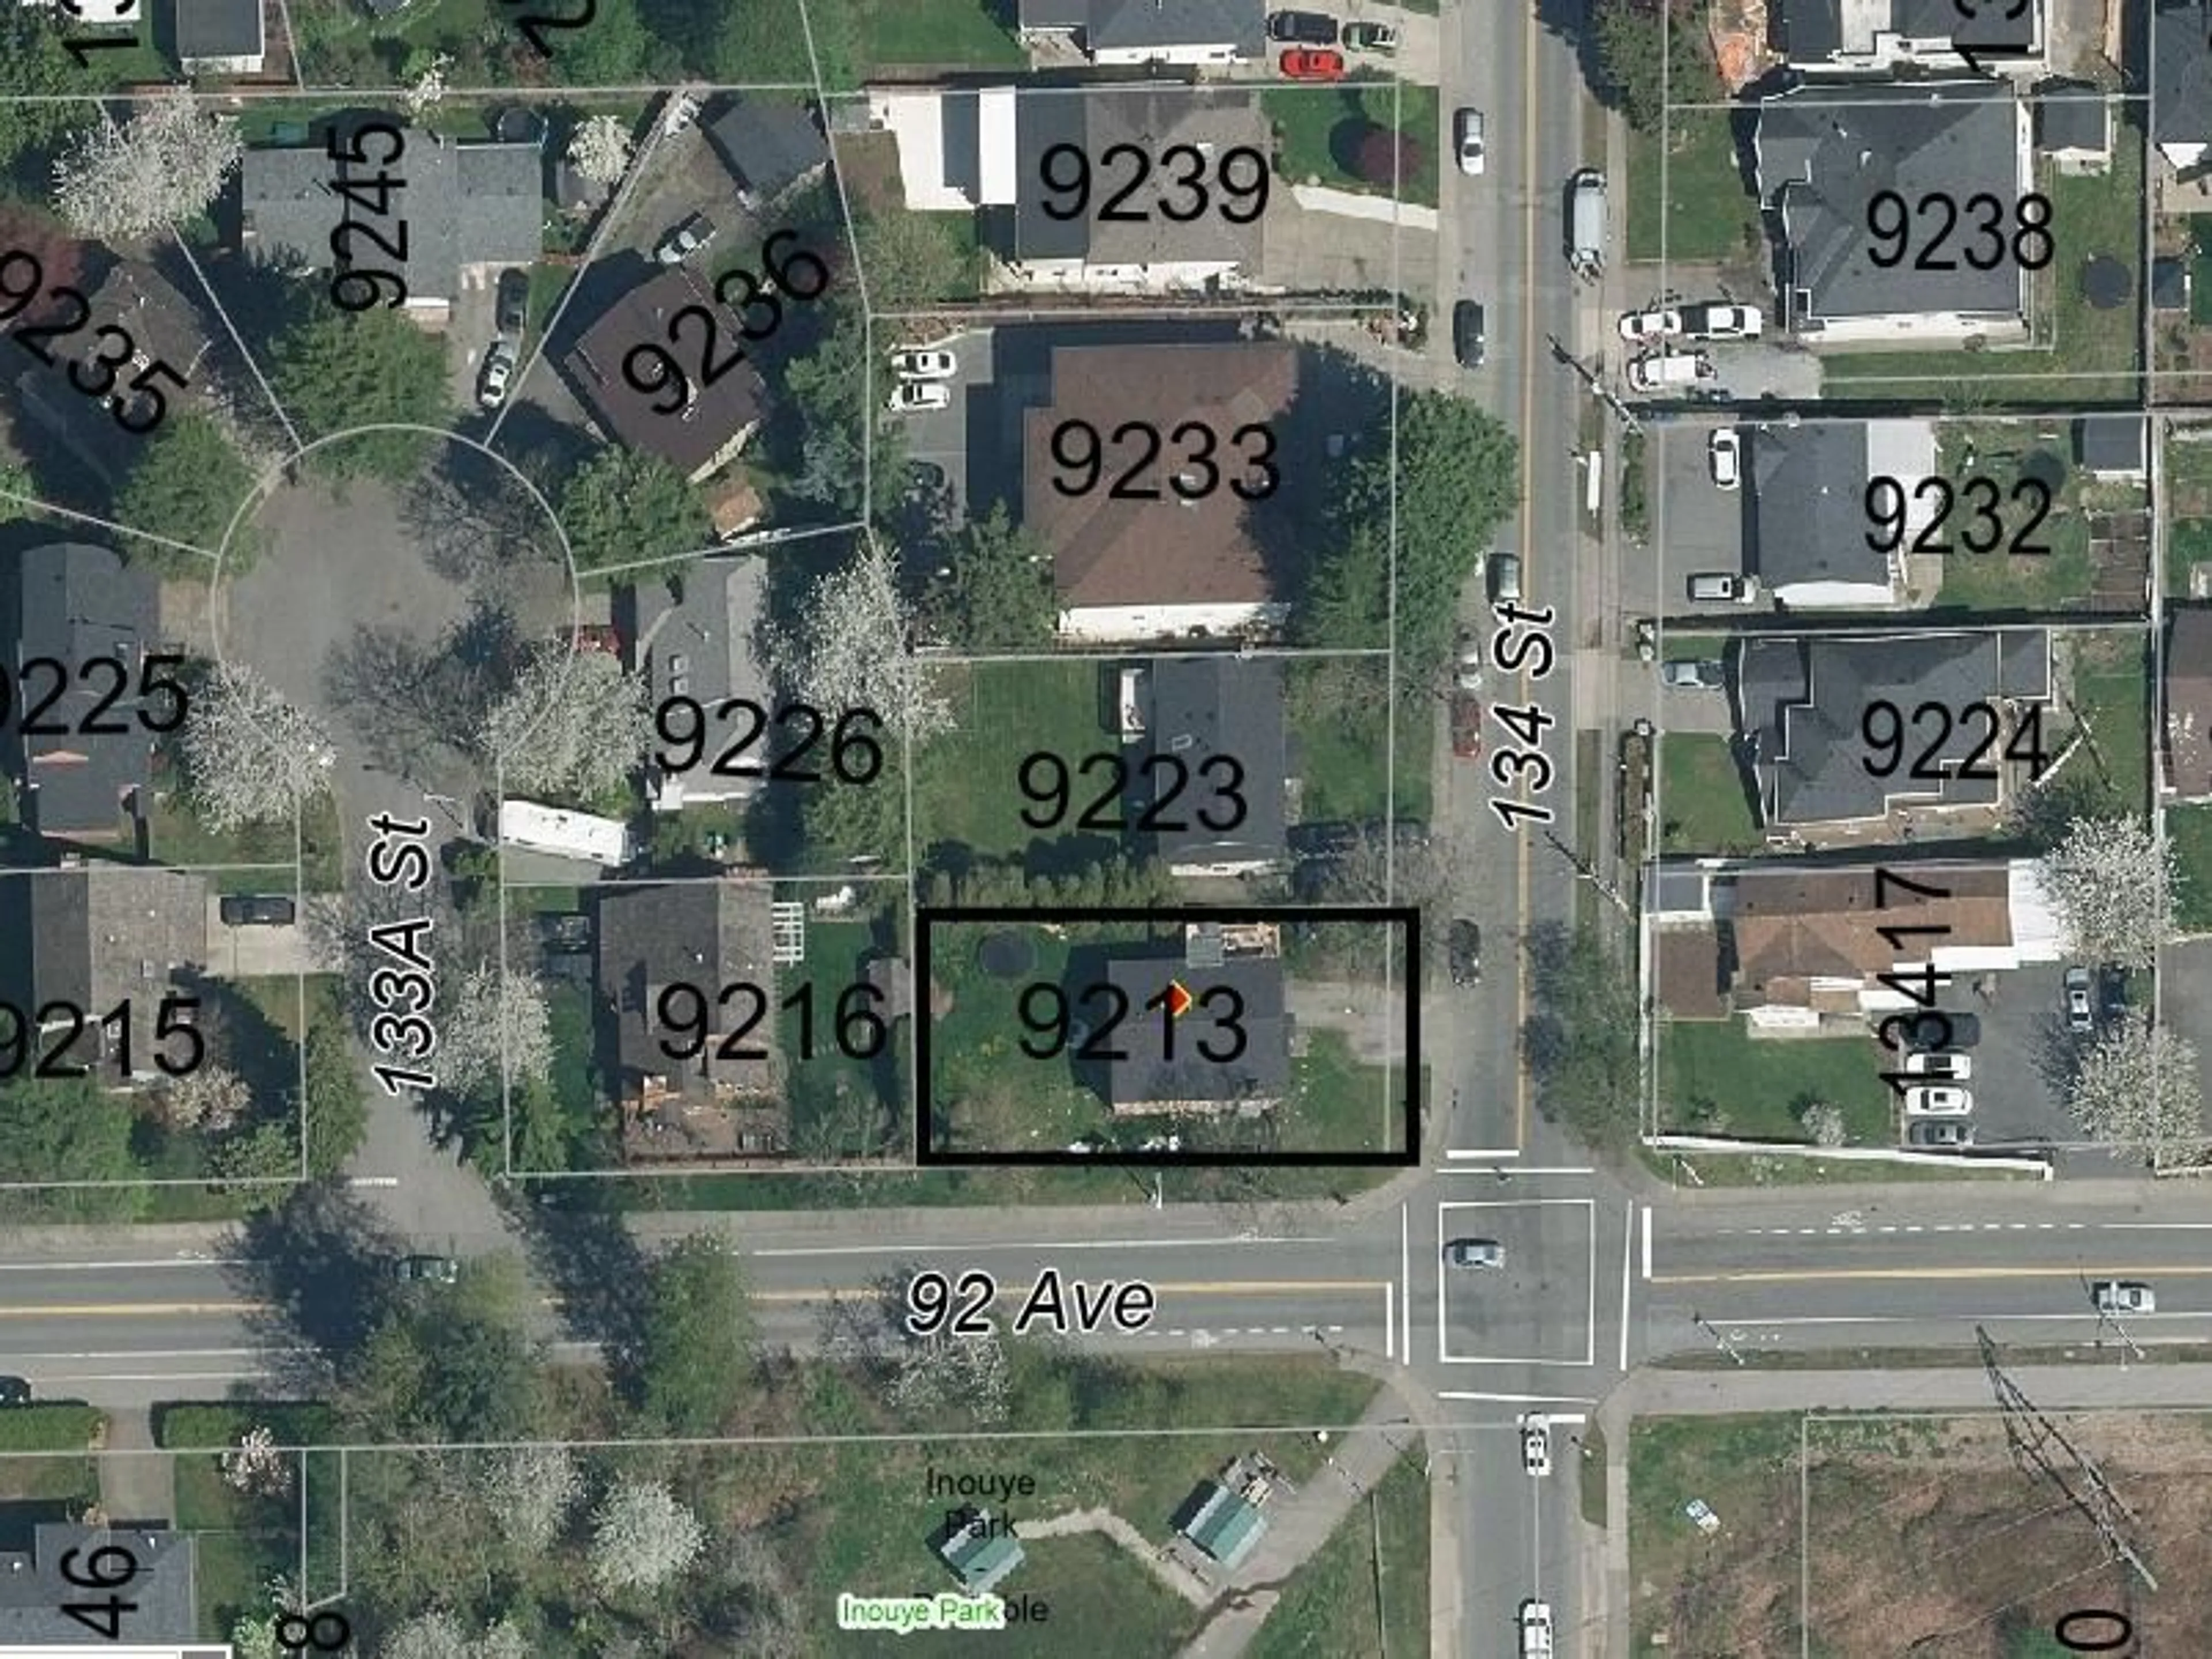 Picture of a map for 9213 134 STREET, Surrey British Columbia V3V5R8